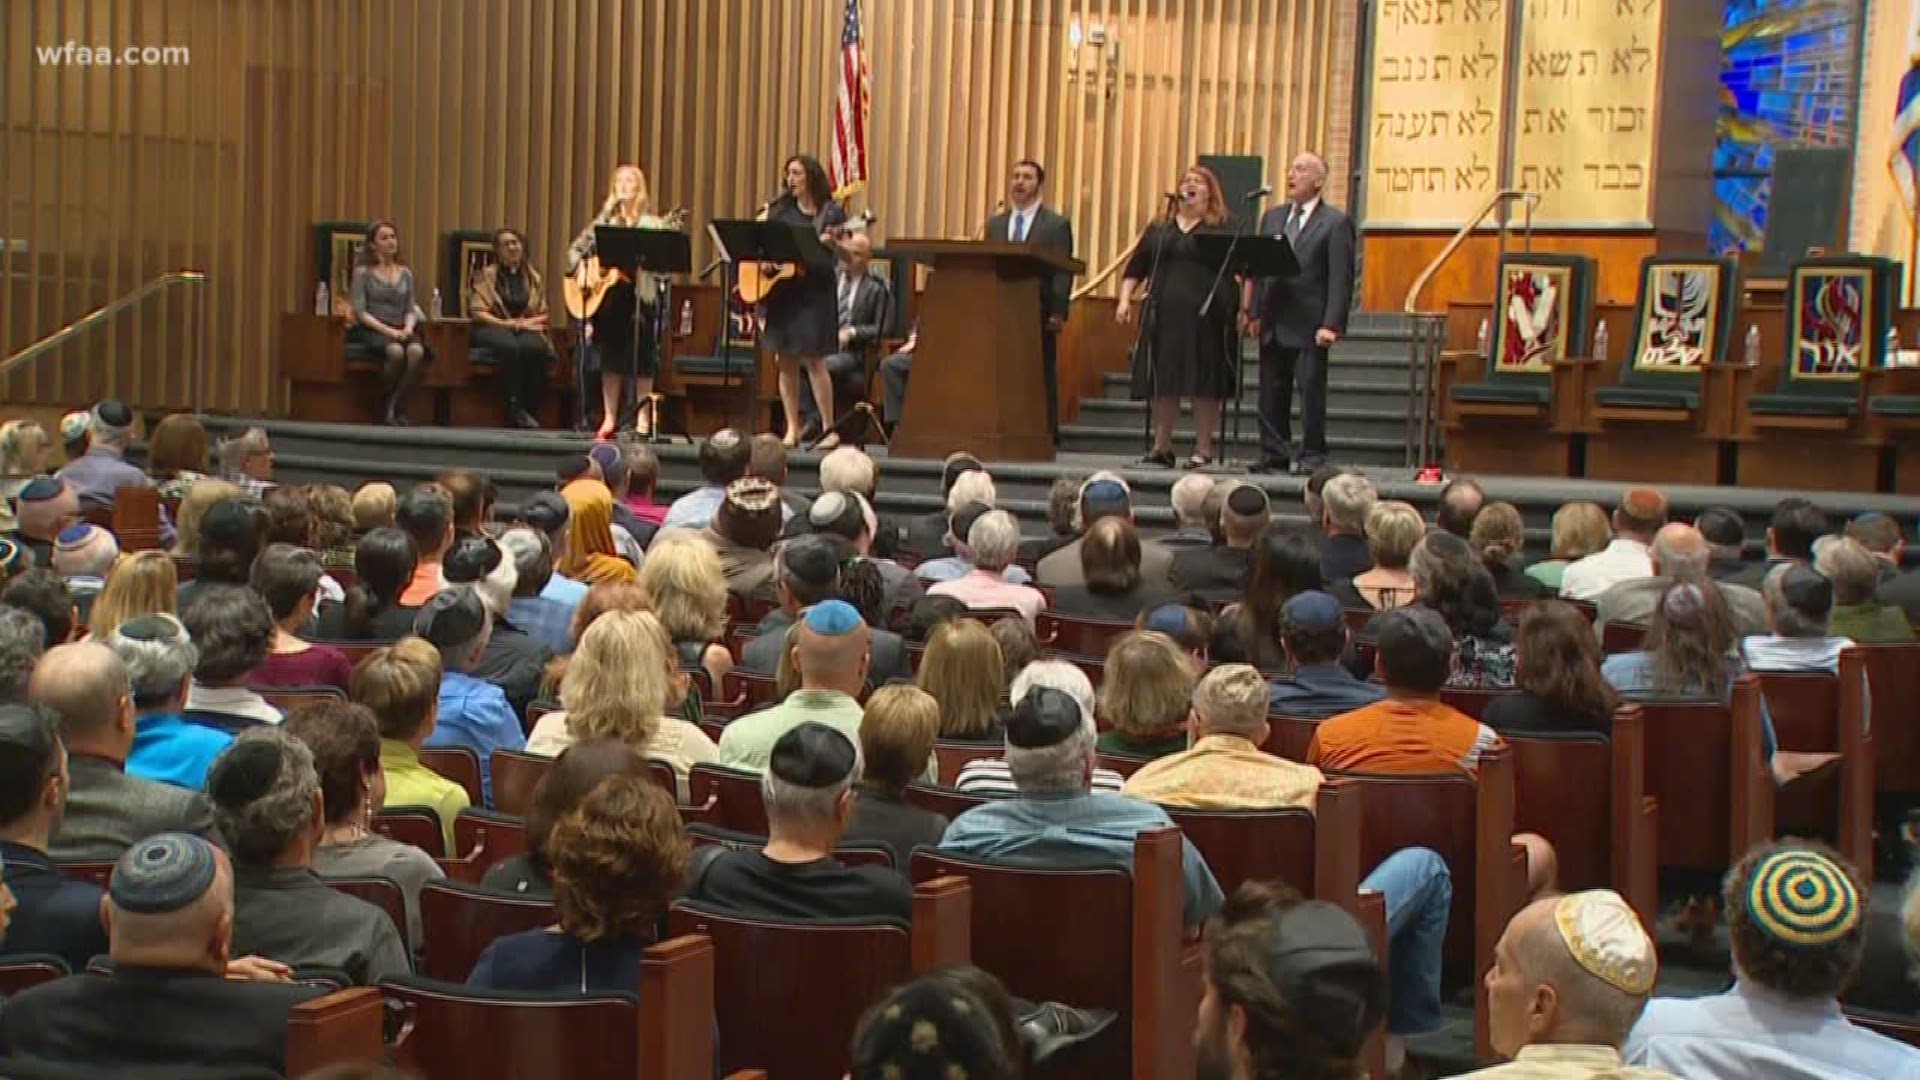 More than 700 people showed up for a vigil at Congregation Shearith Israel, to support the Jewish community of Pittsburgh and beyond